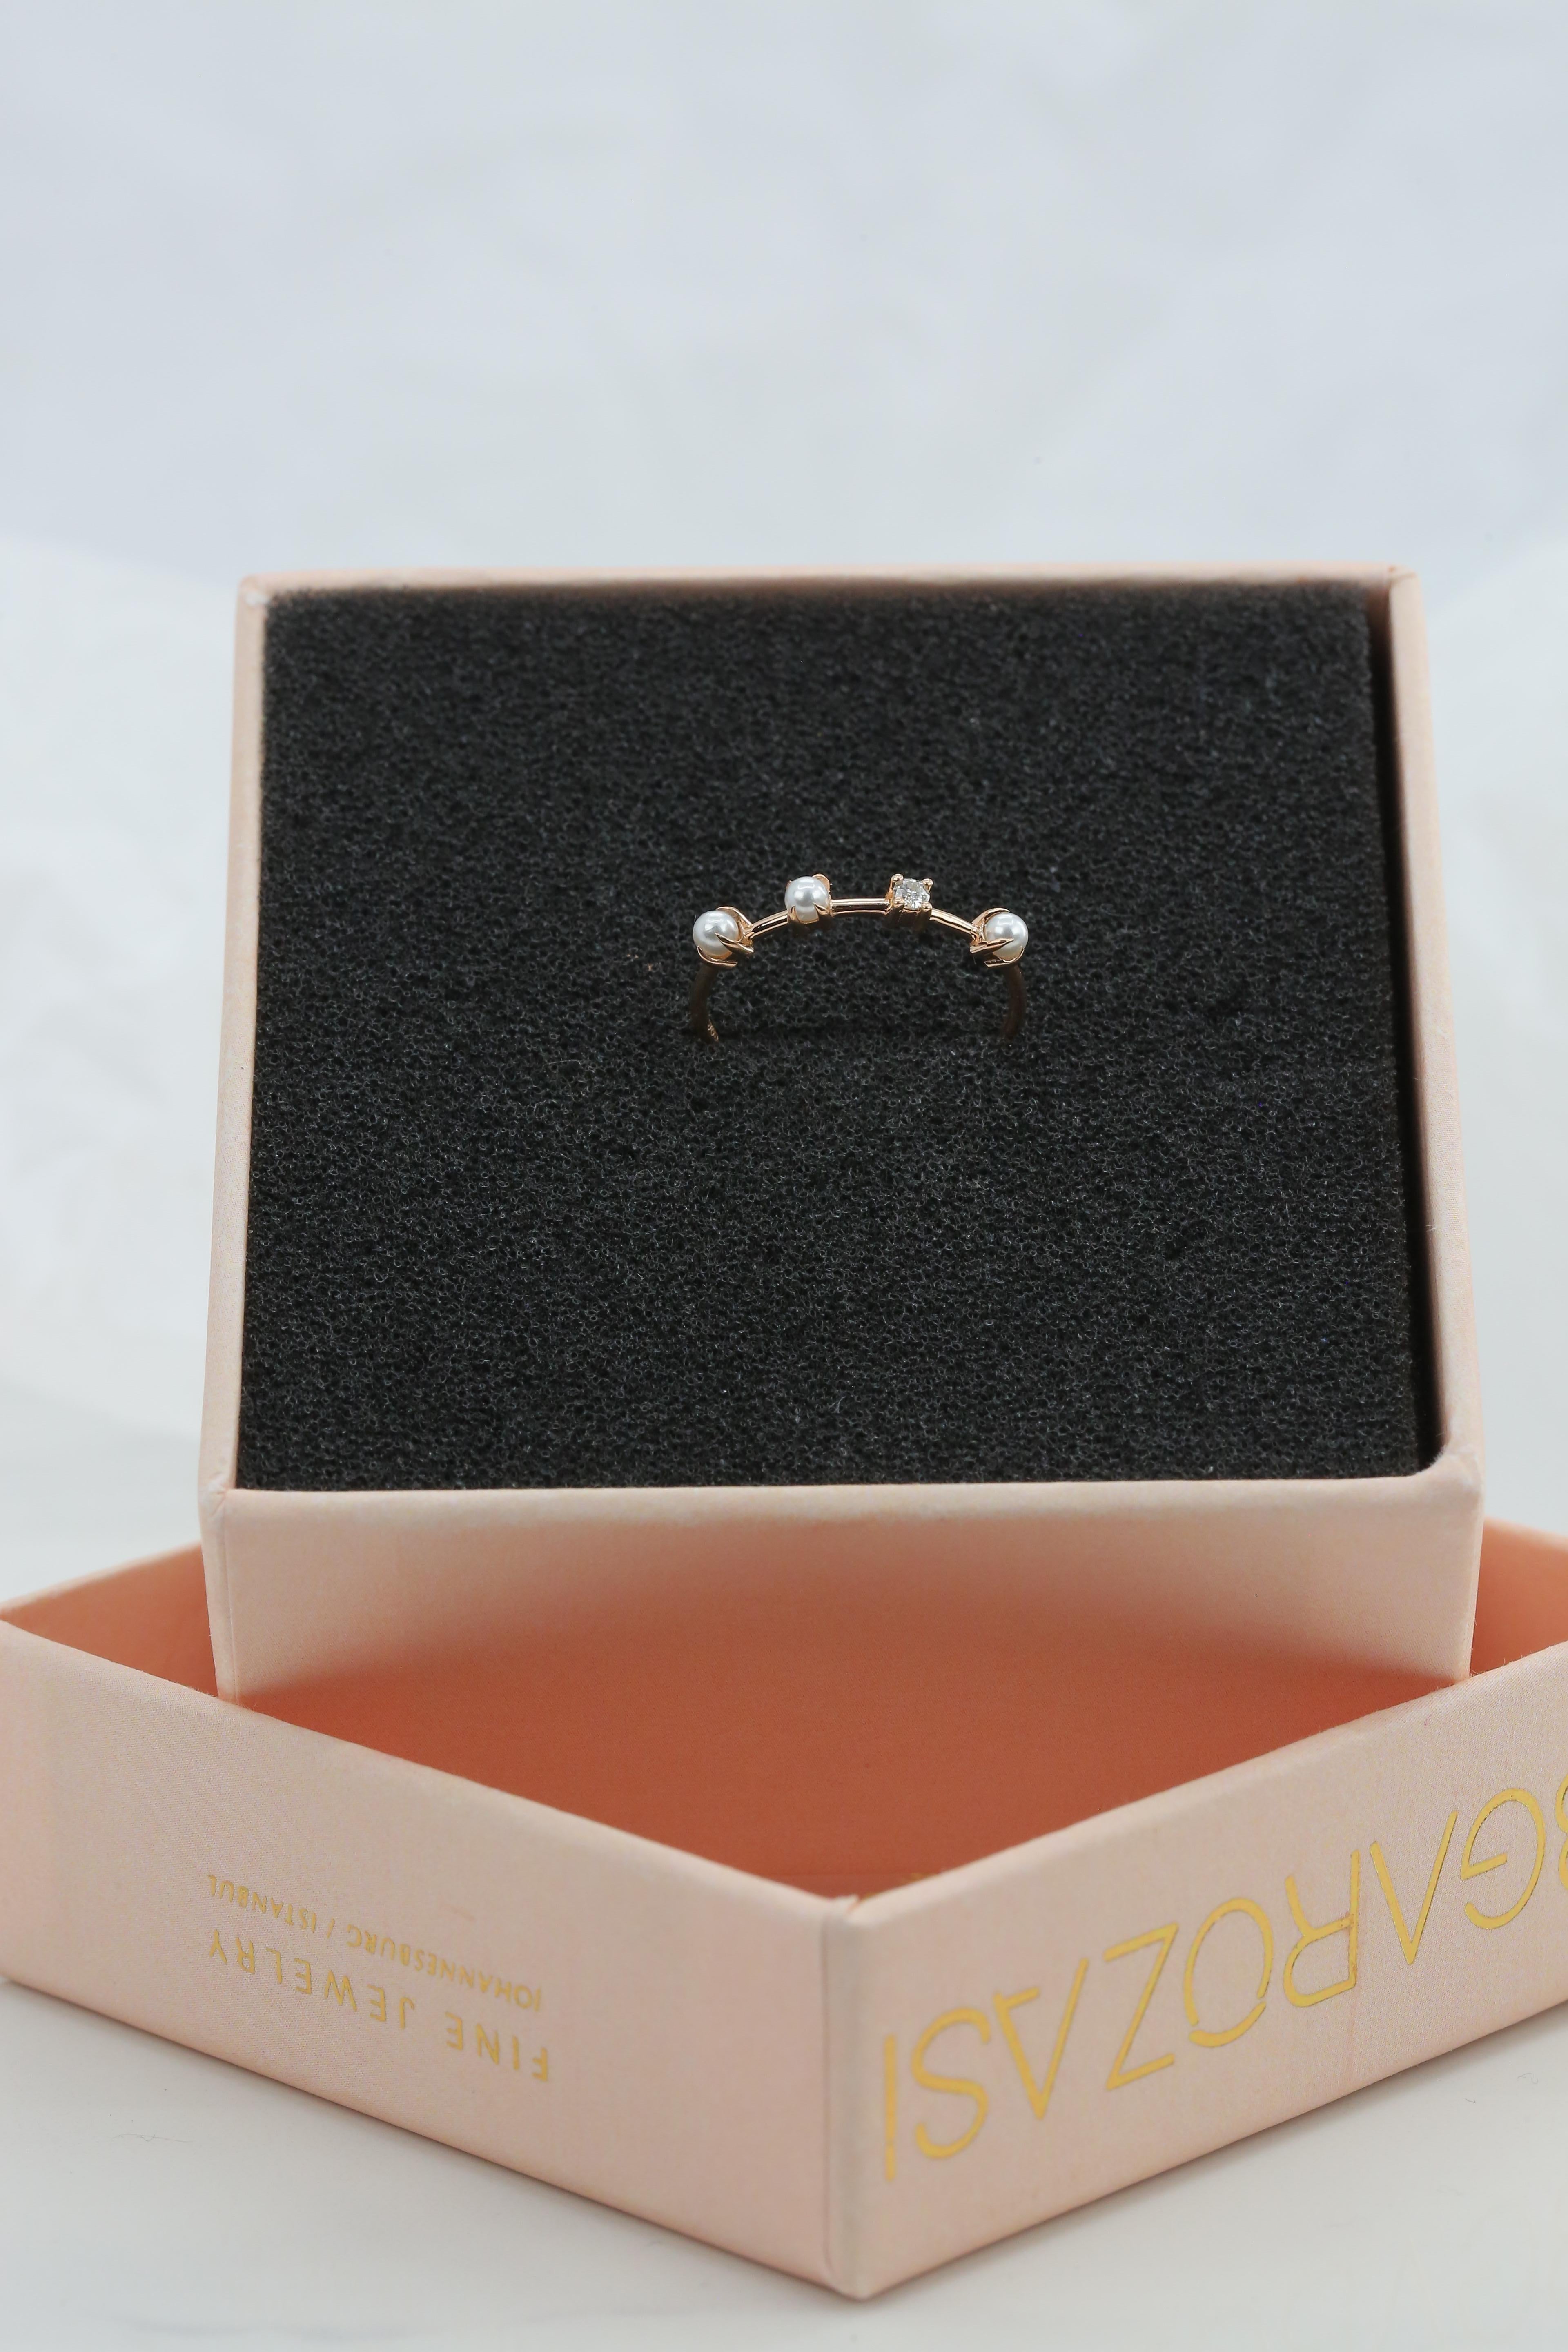 For Sale:  Three Pearl and Diamond Ring, 14K Gold Pearl Ring, Minimalist Style Ring 4